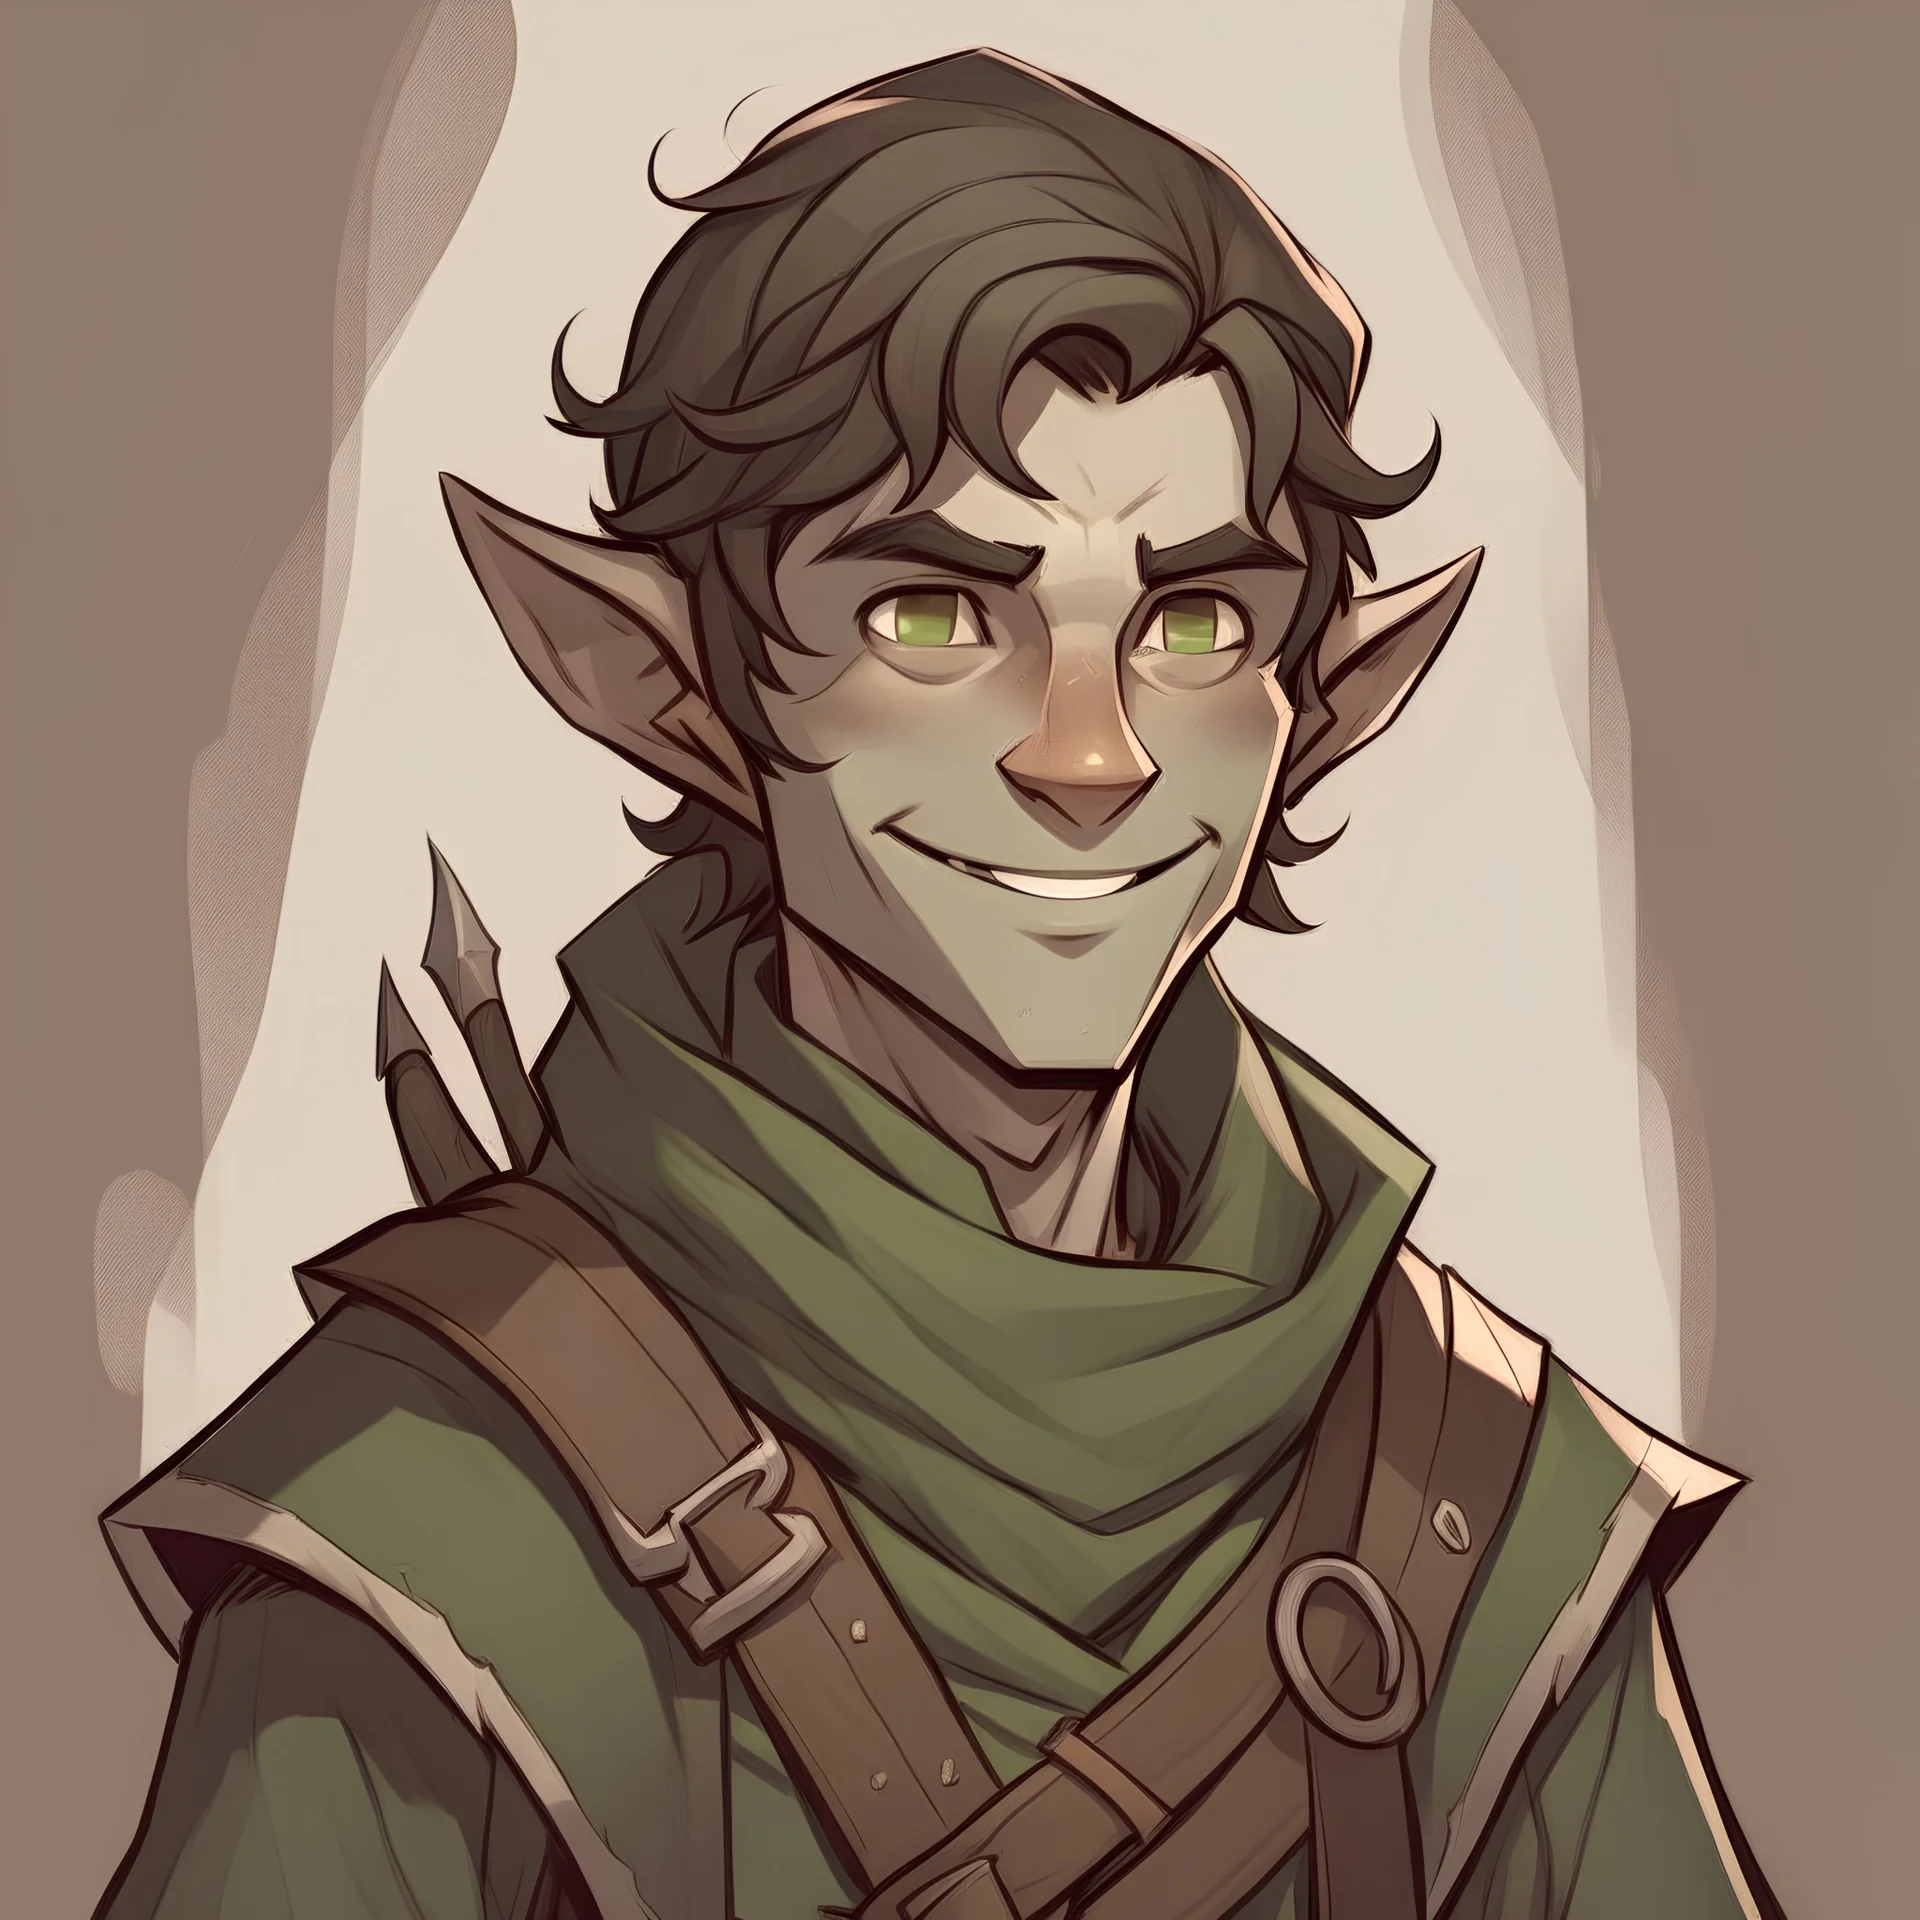 DND rogue young half-elf male cheeky smirk